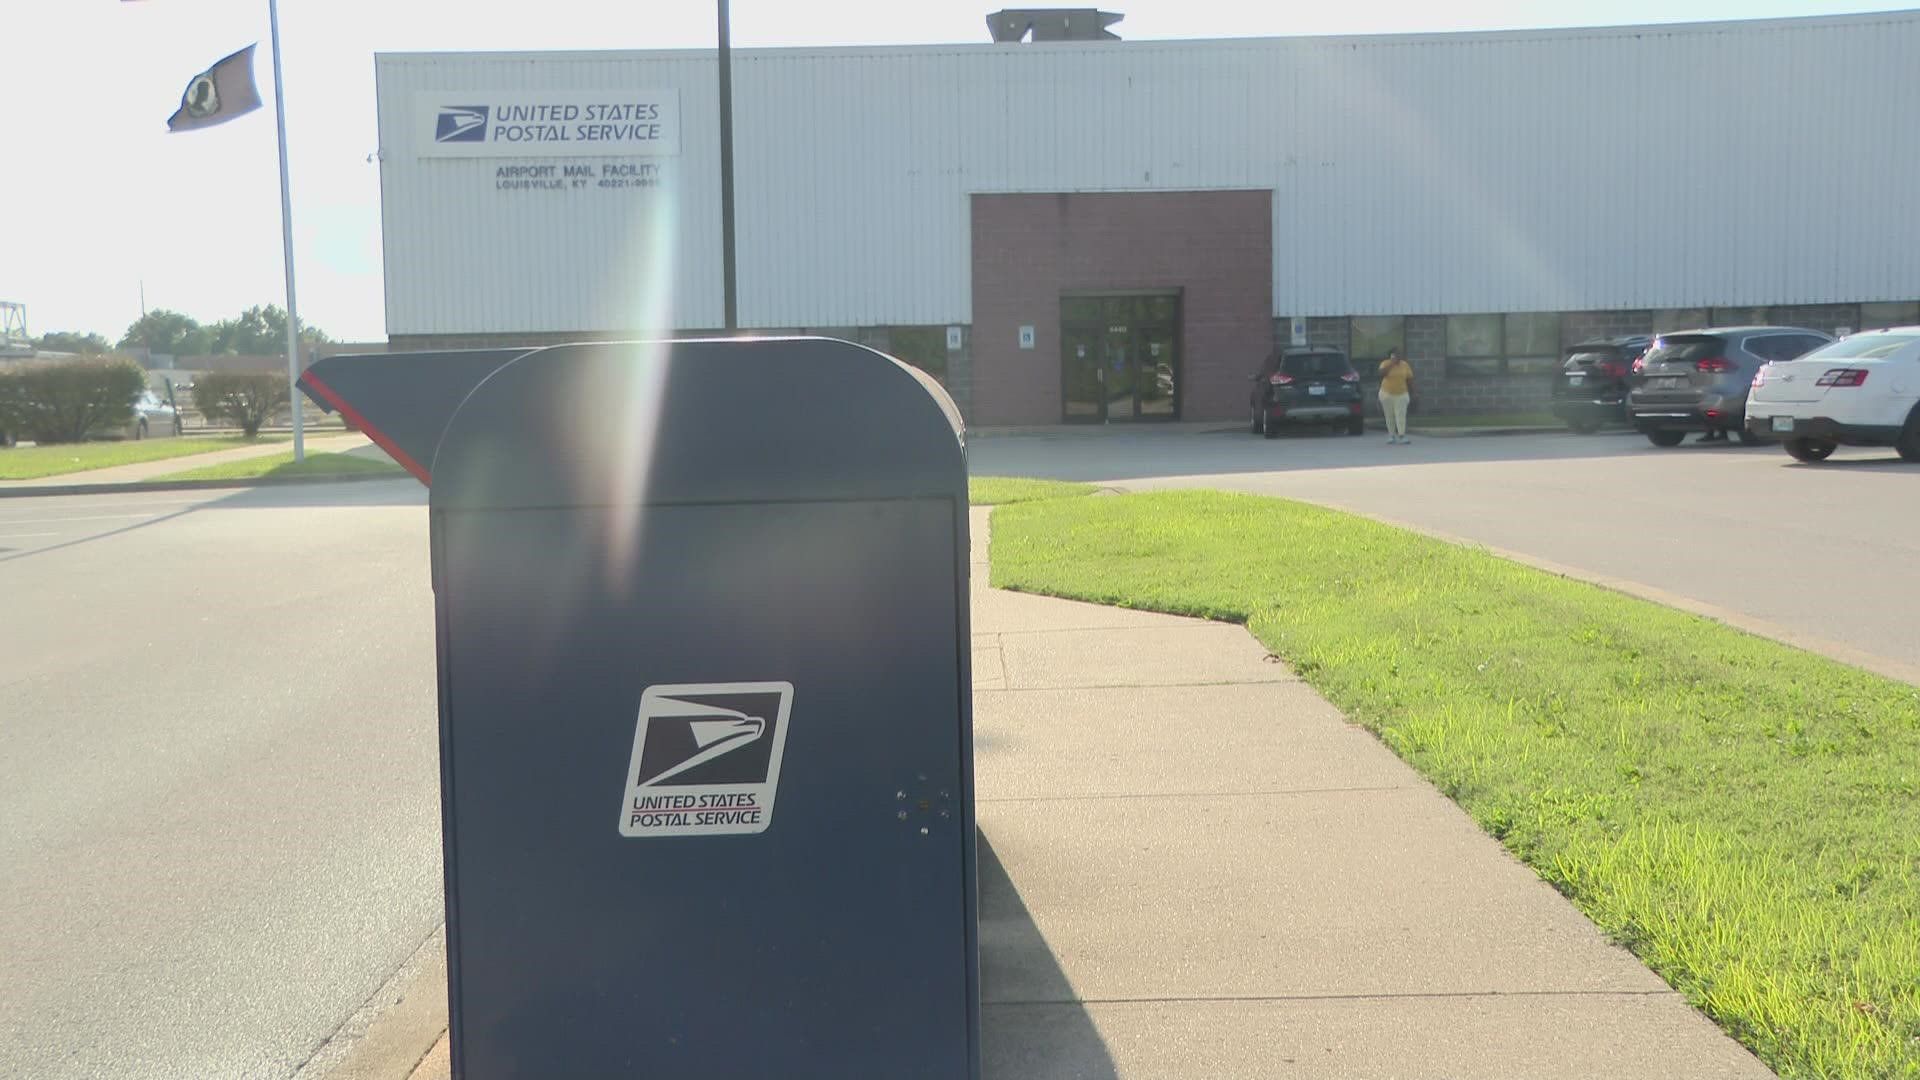 In August, two postal workers were robbed within two weeks. Their keys were stolen.